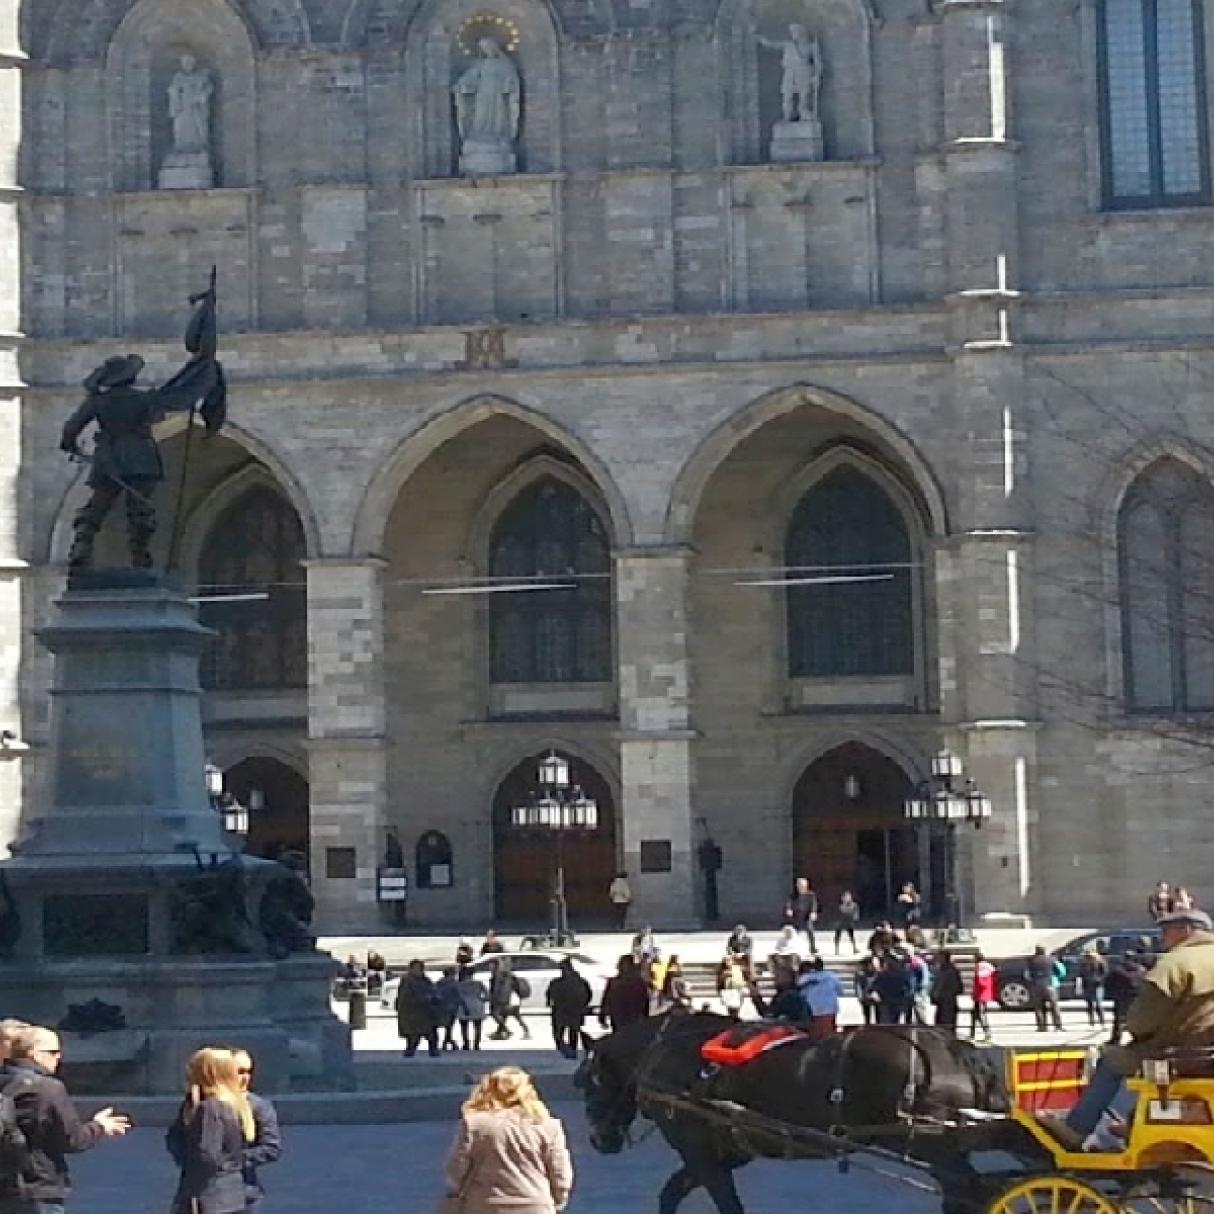 People in front of the Notre Dame cathedral in Montreal